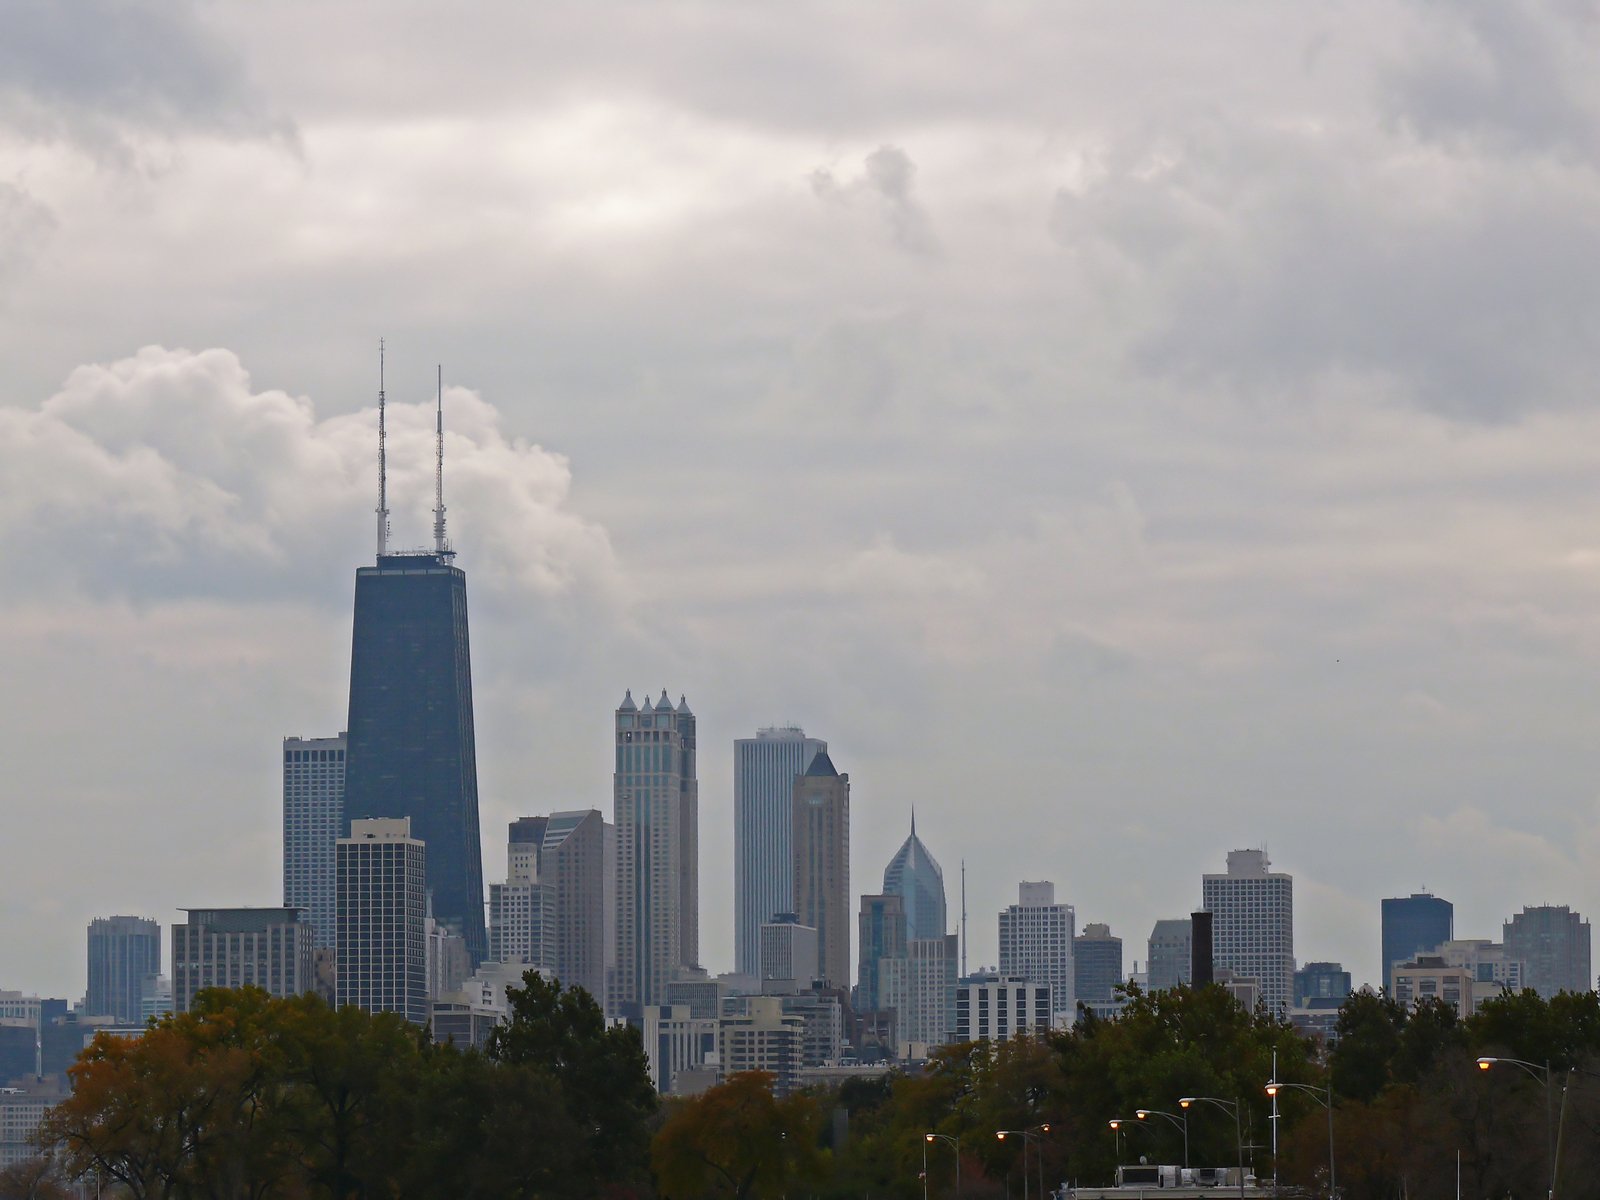 a tall building is seen with other buildings in the background